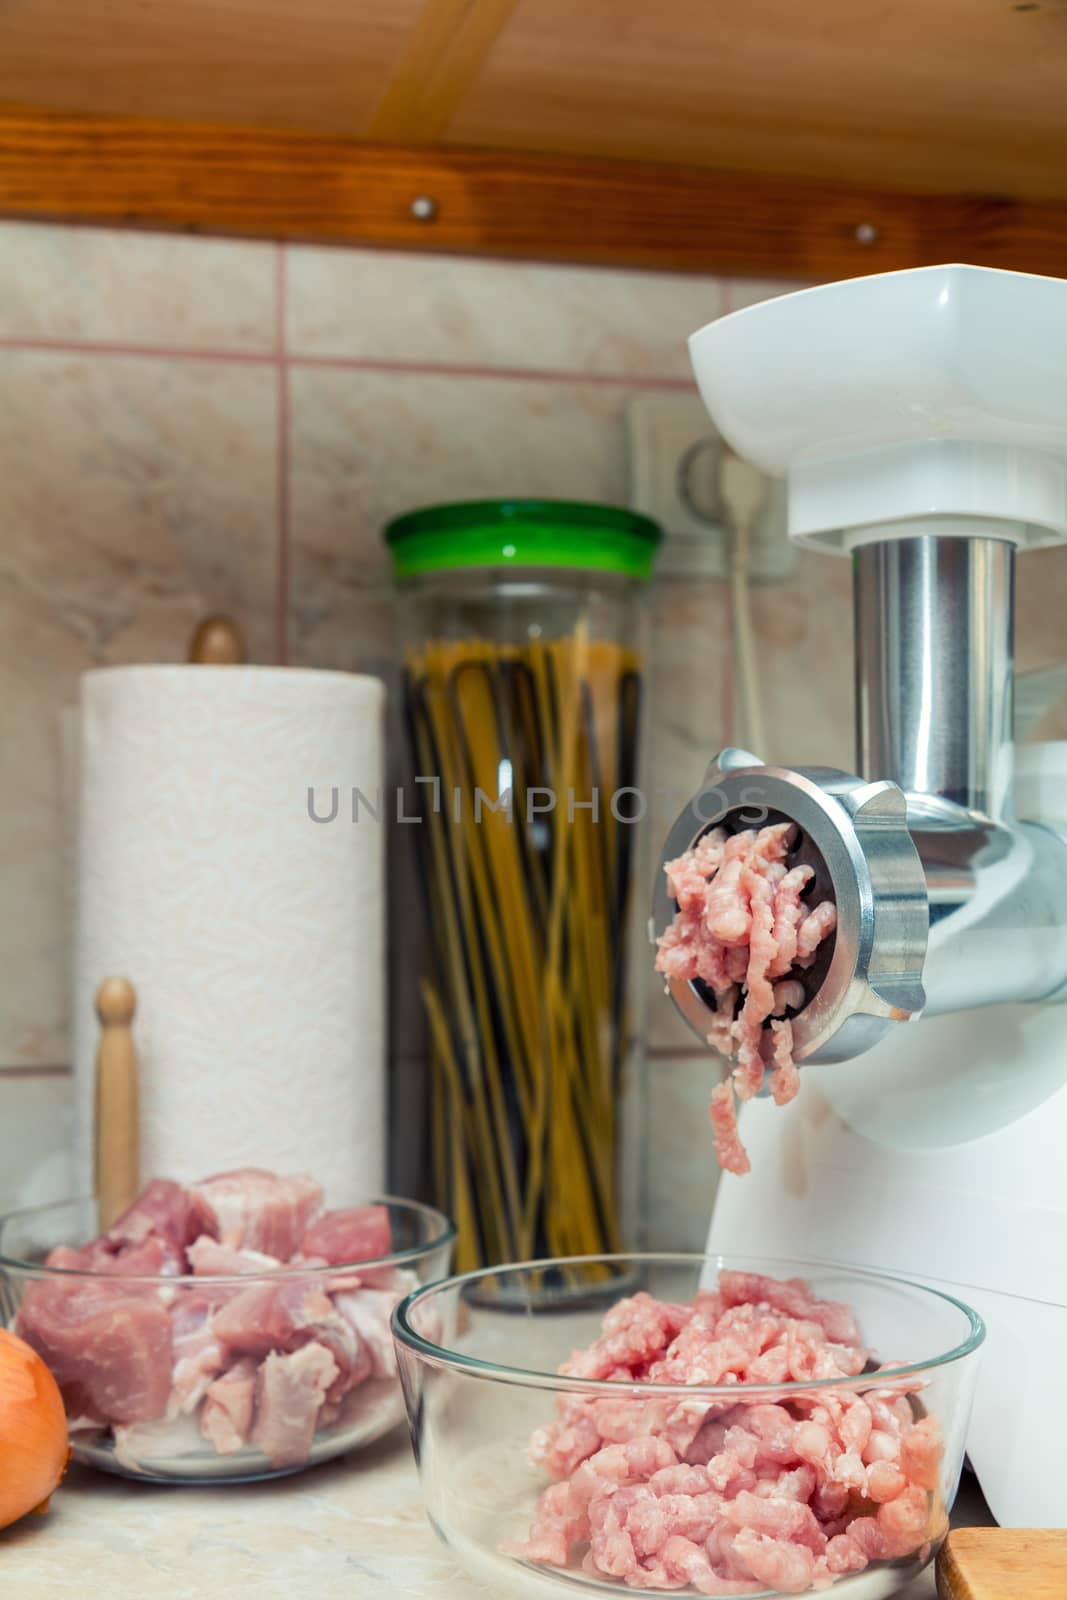 Home electric meat-grinder is making pork stuffing in a modern kitchen. Pork stuffing in a glass bowl.